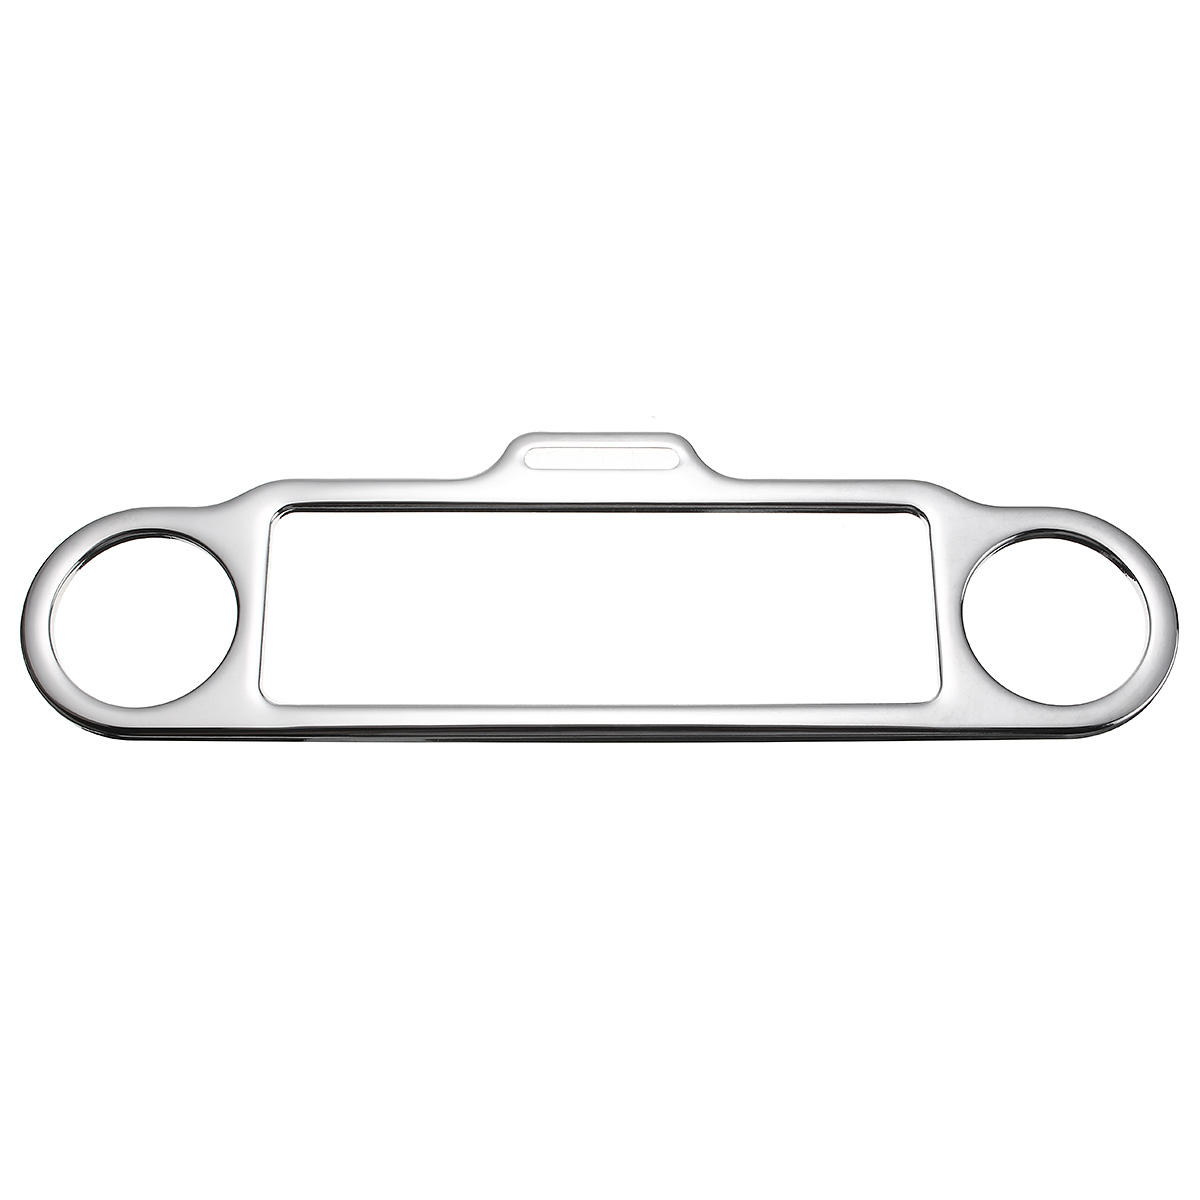 Trim Ring Stereo Accent Cover For Harley Davidson Electra Street Glide Touring Chrome